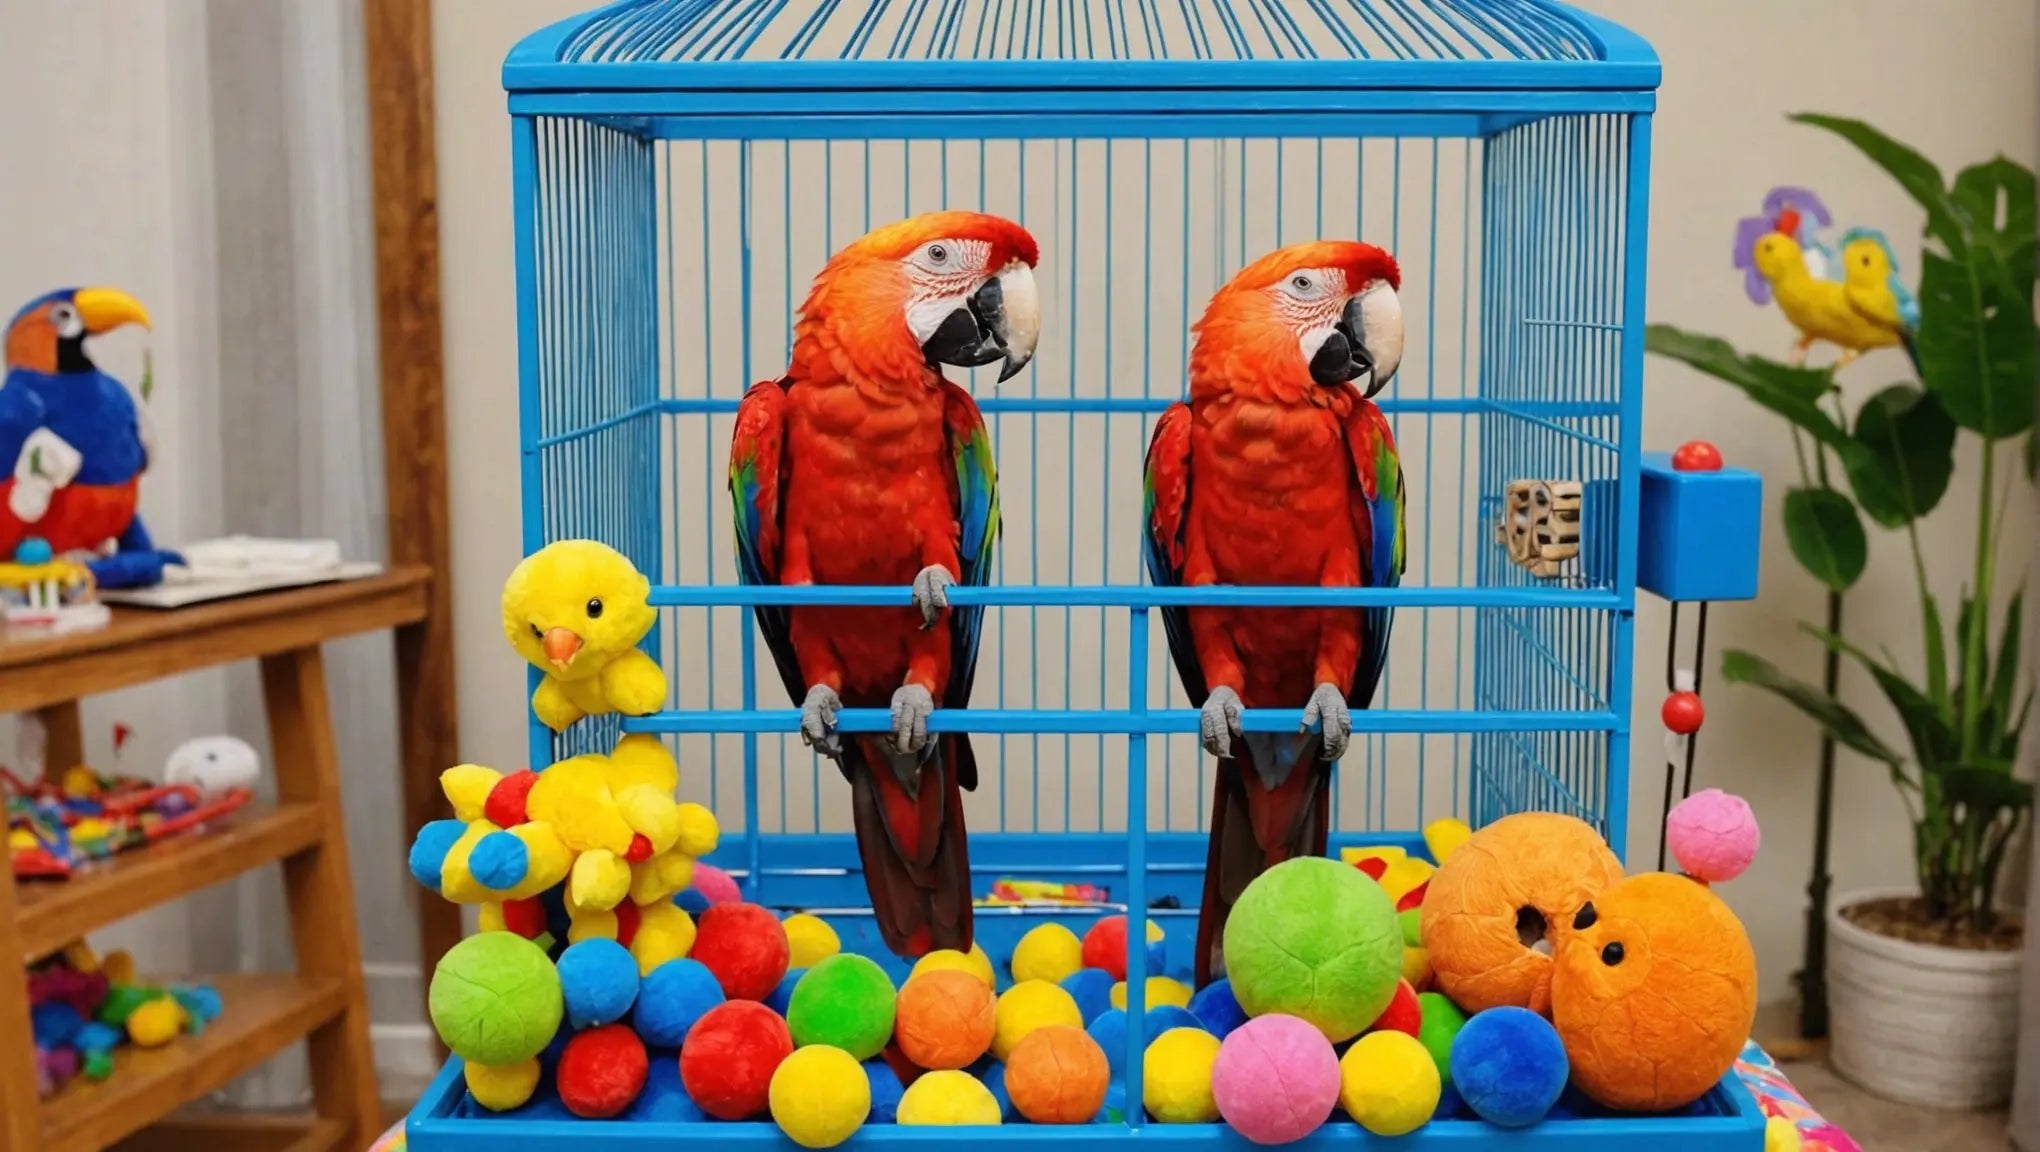 Find the Perfect Bird Cage with Playtop for Your Feathered Friend